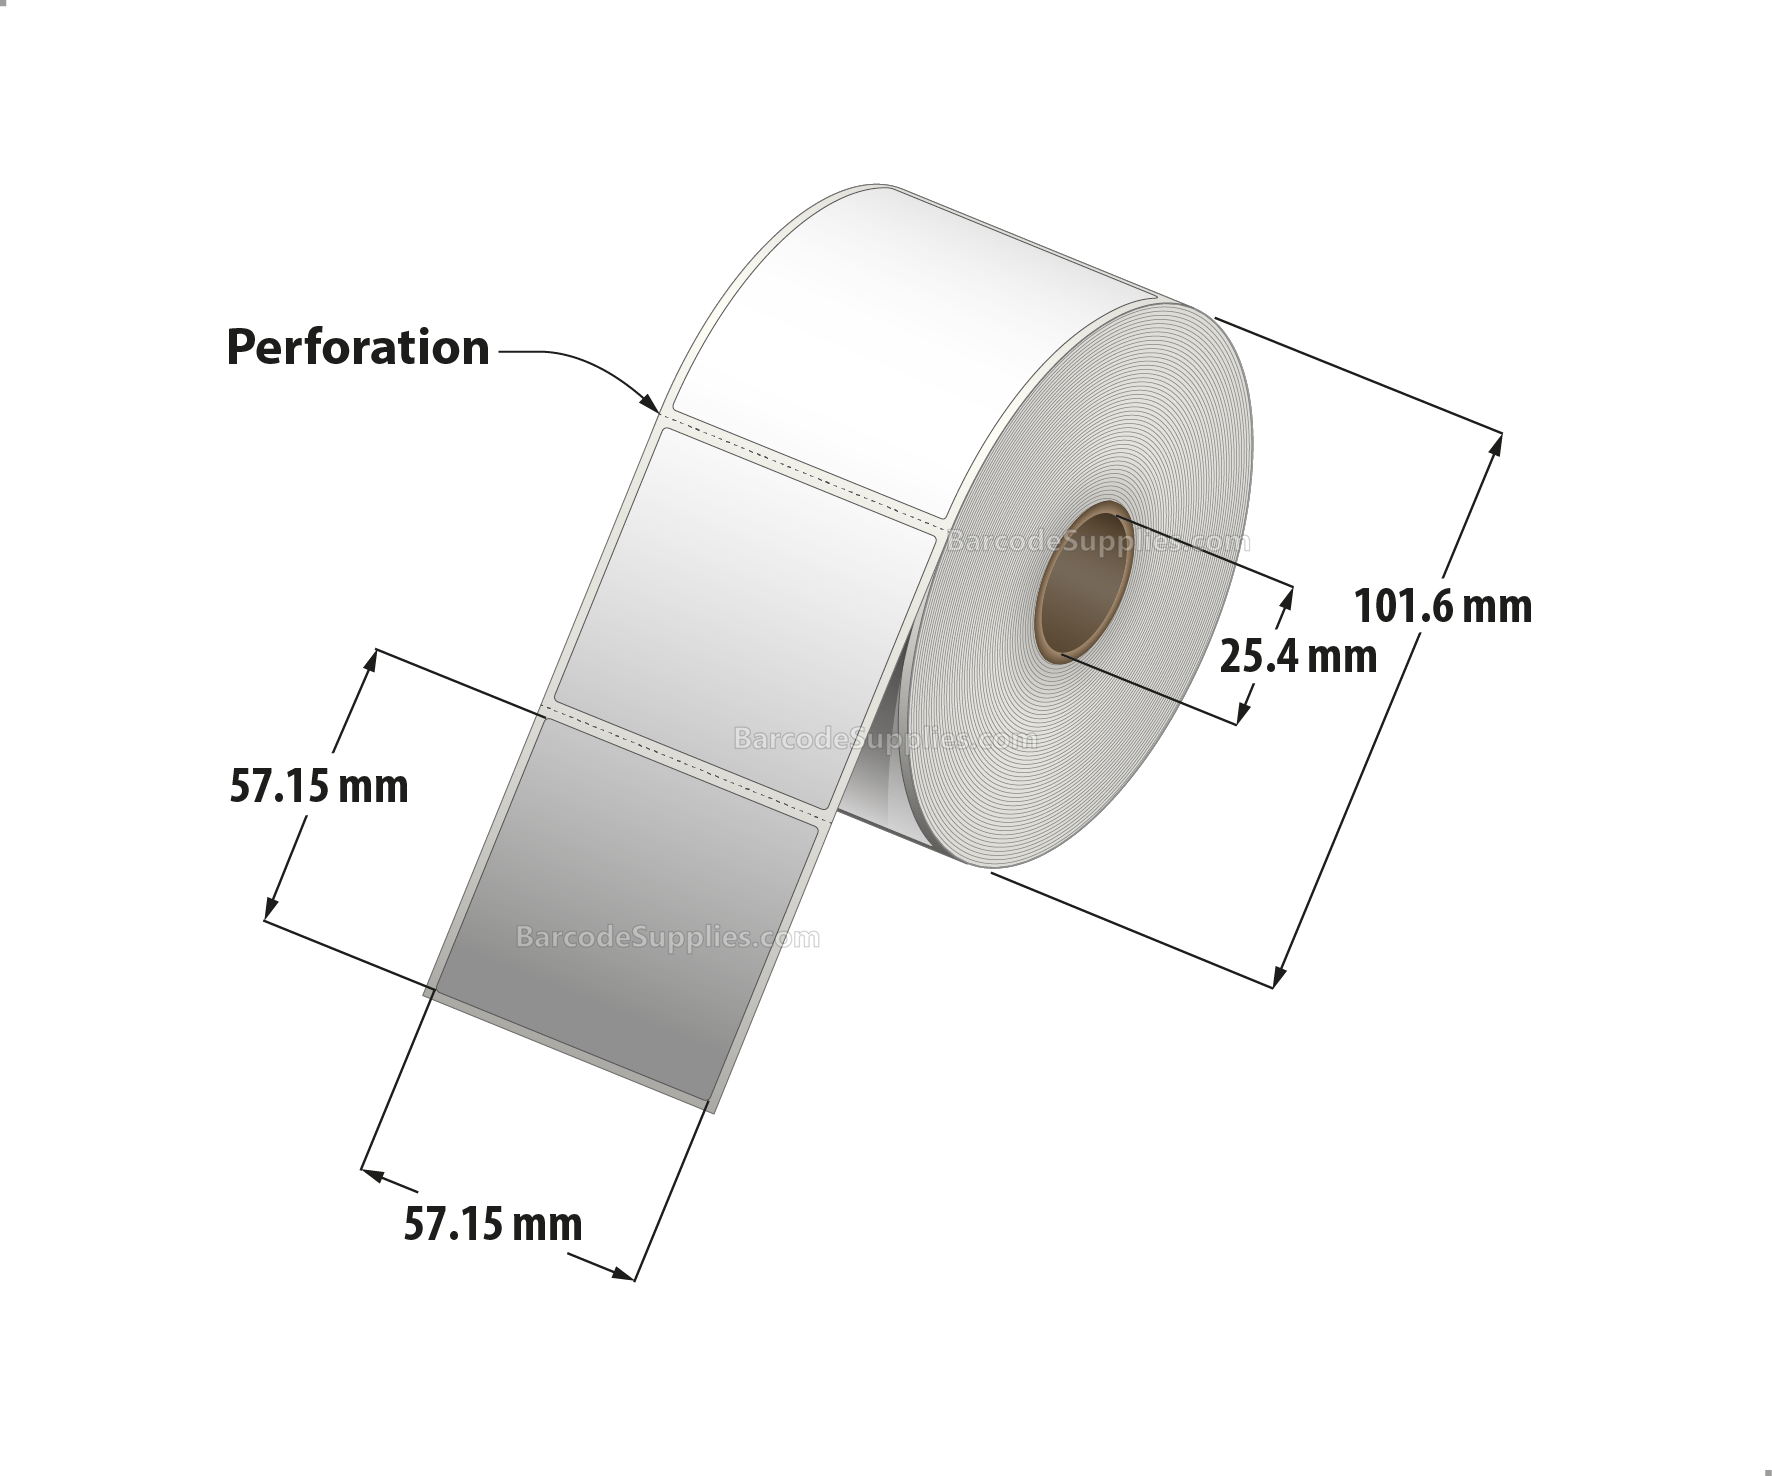 2.25 x 2.25 Direct Thermal White Labels With Rubber Adhesive - Perforated - 700 Labels Per Roll - Carton Of 12 Rolls - 8400 Labels Total - MPN: RDT4-225225-1P